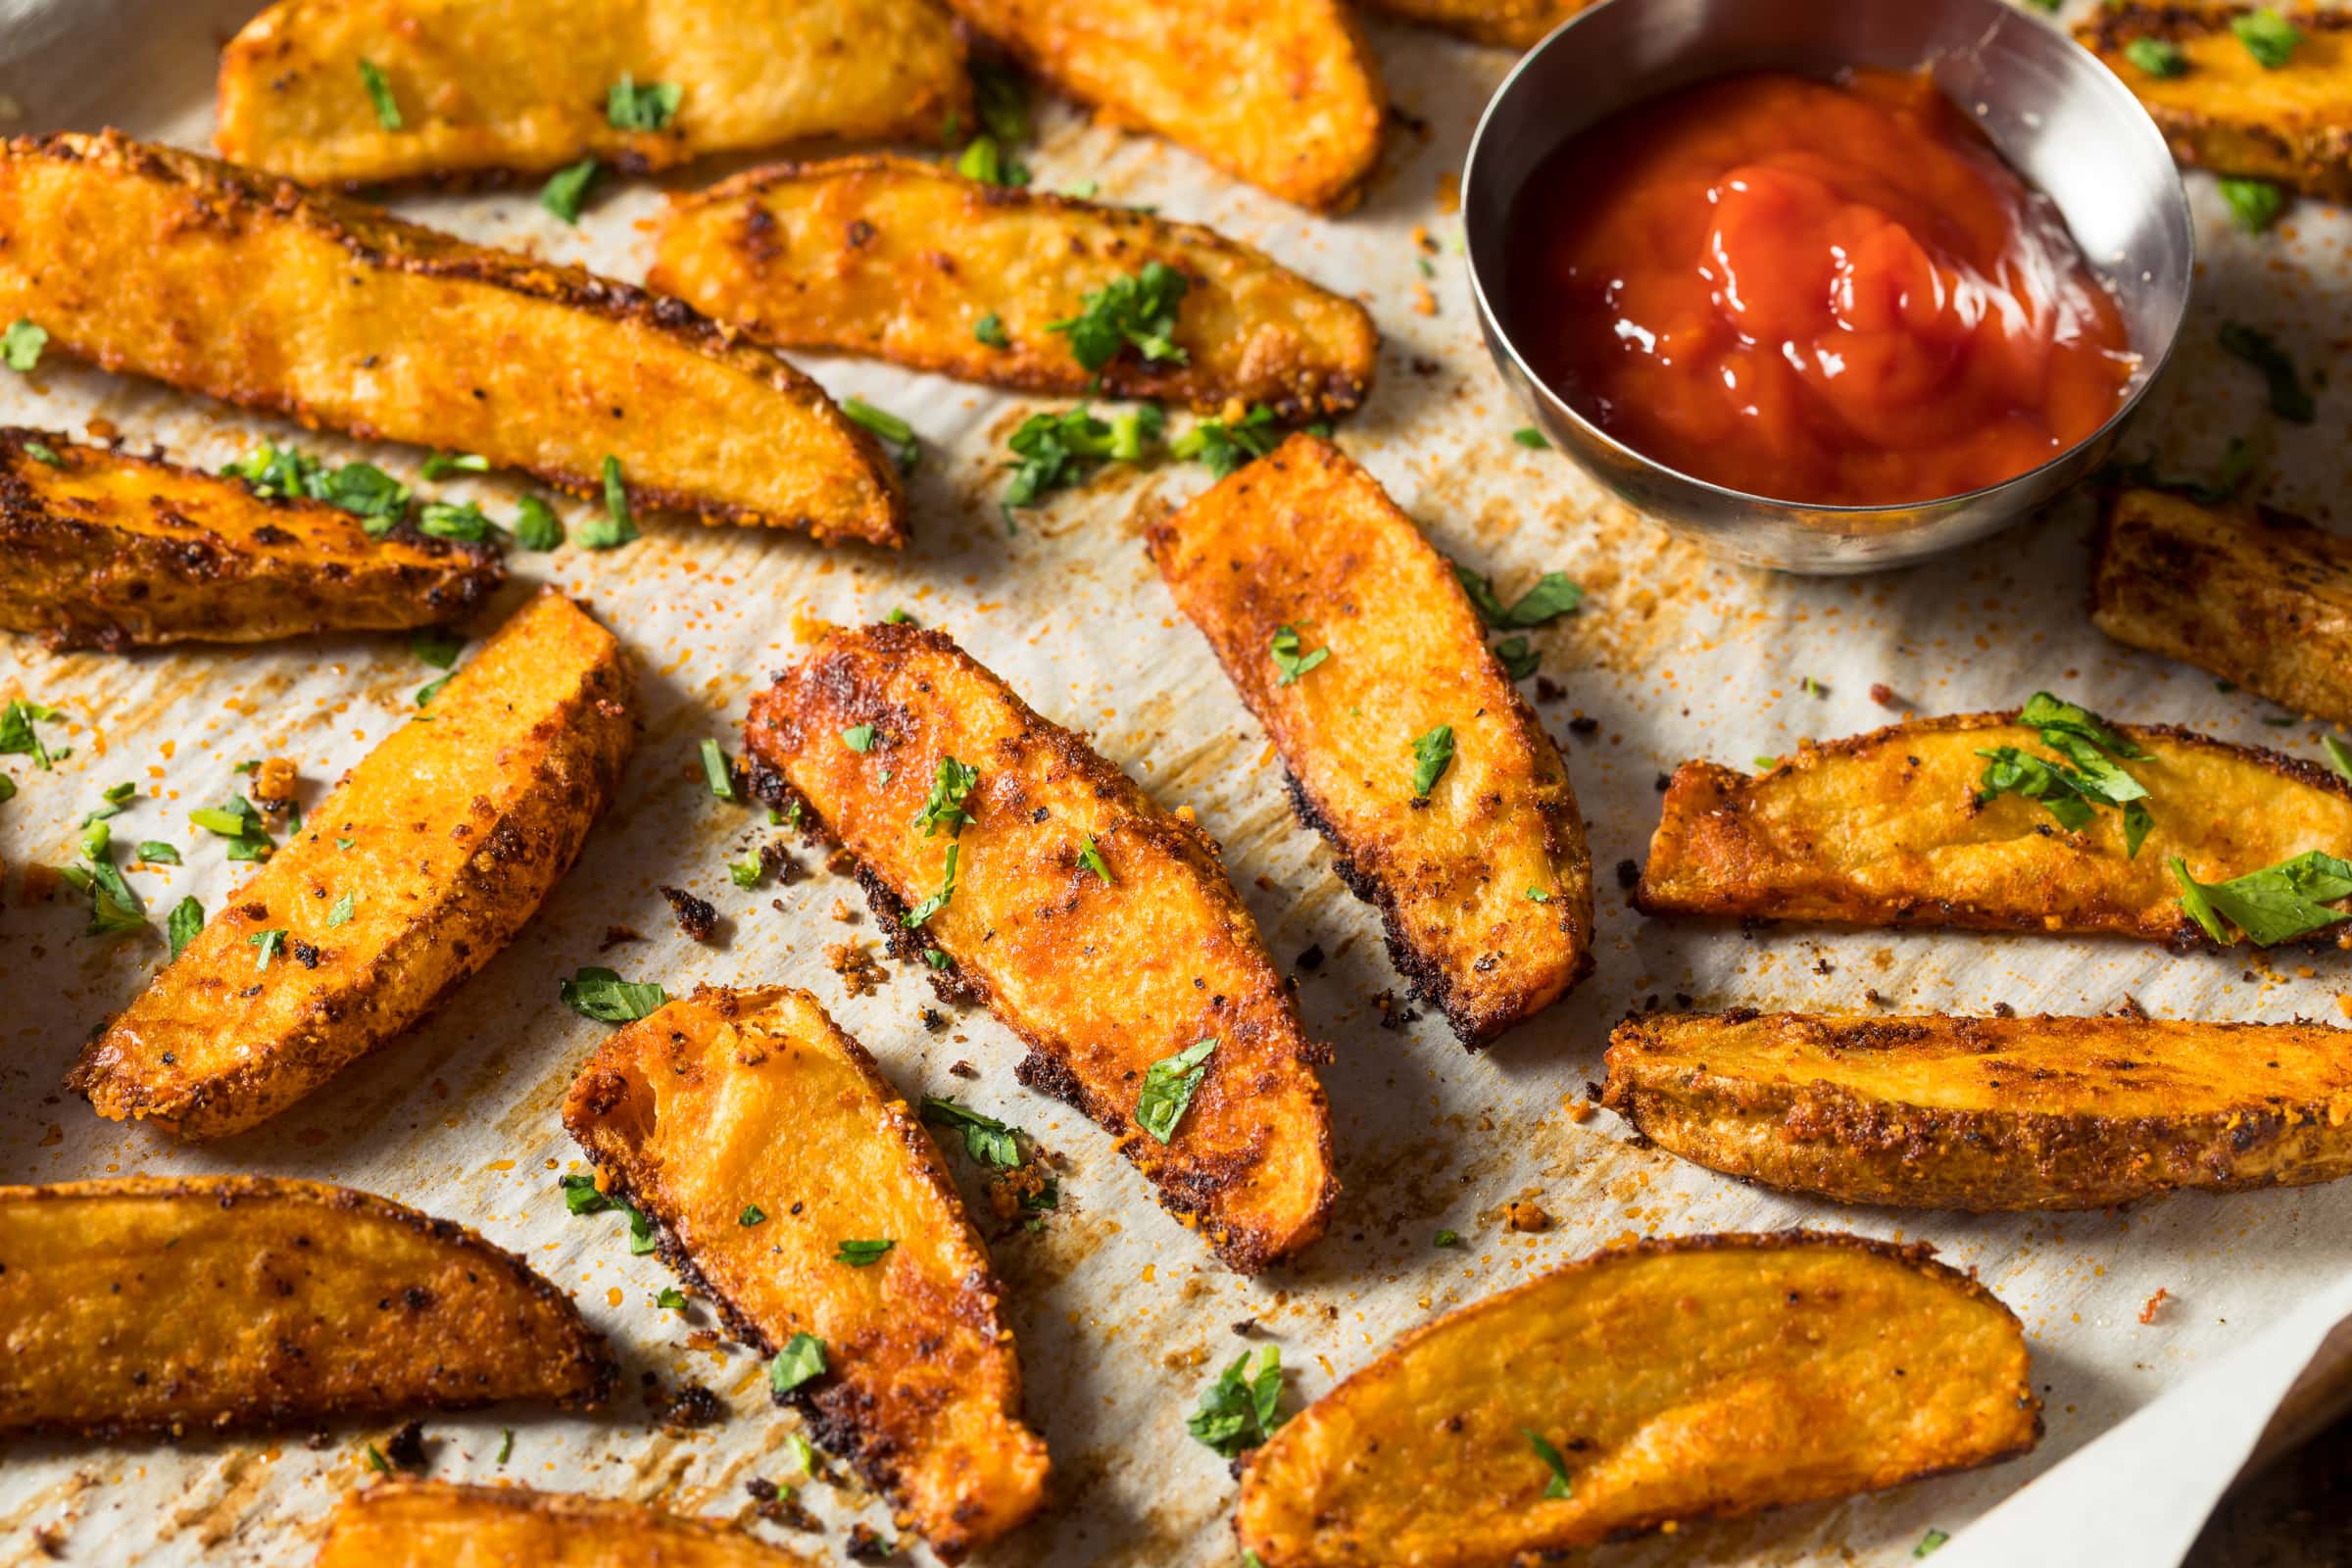 Homemade Baked Potato Wedges with Herbs and Garlic